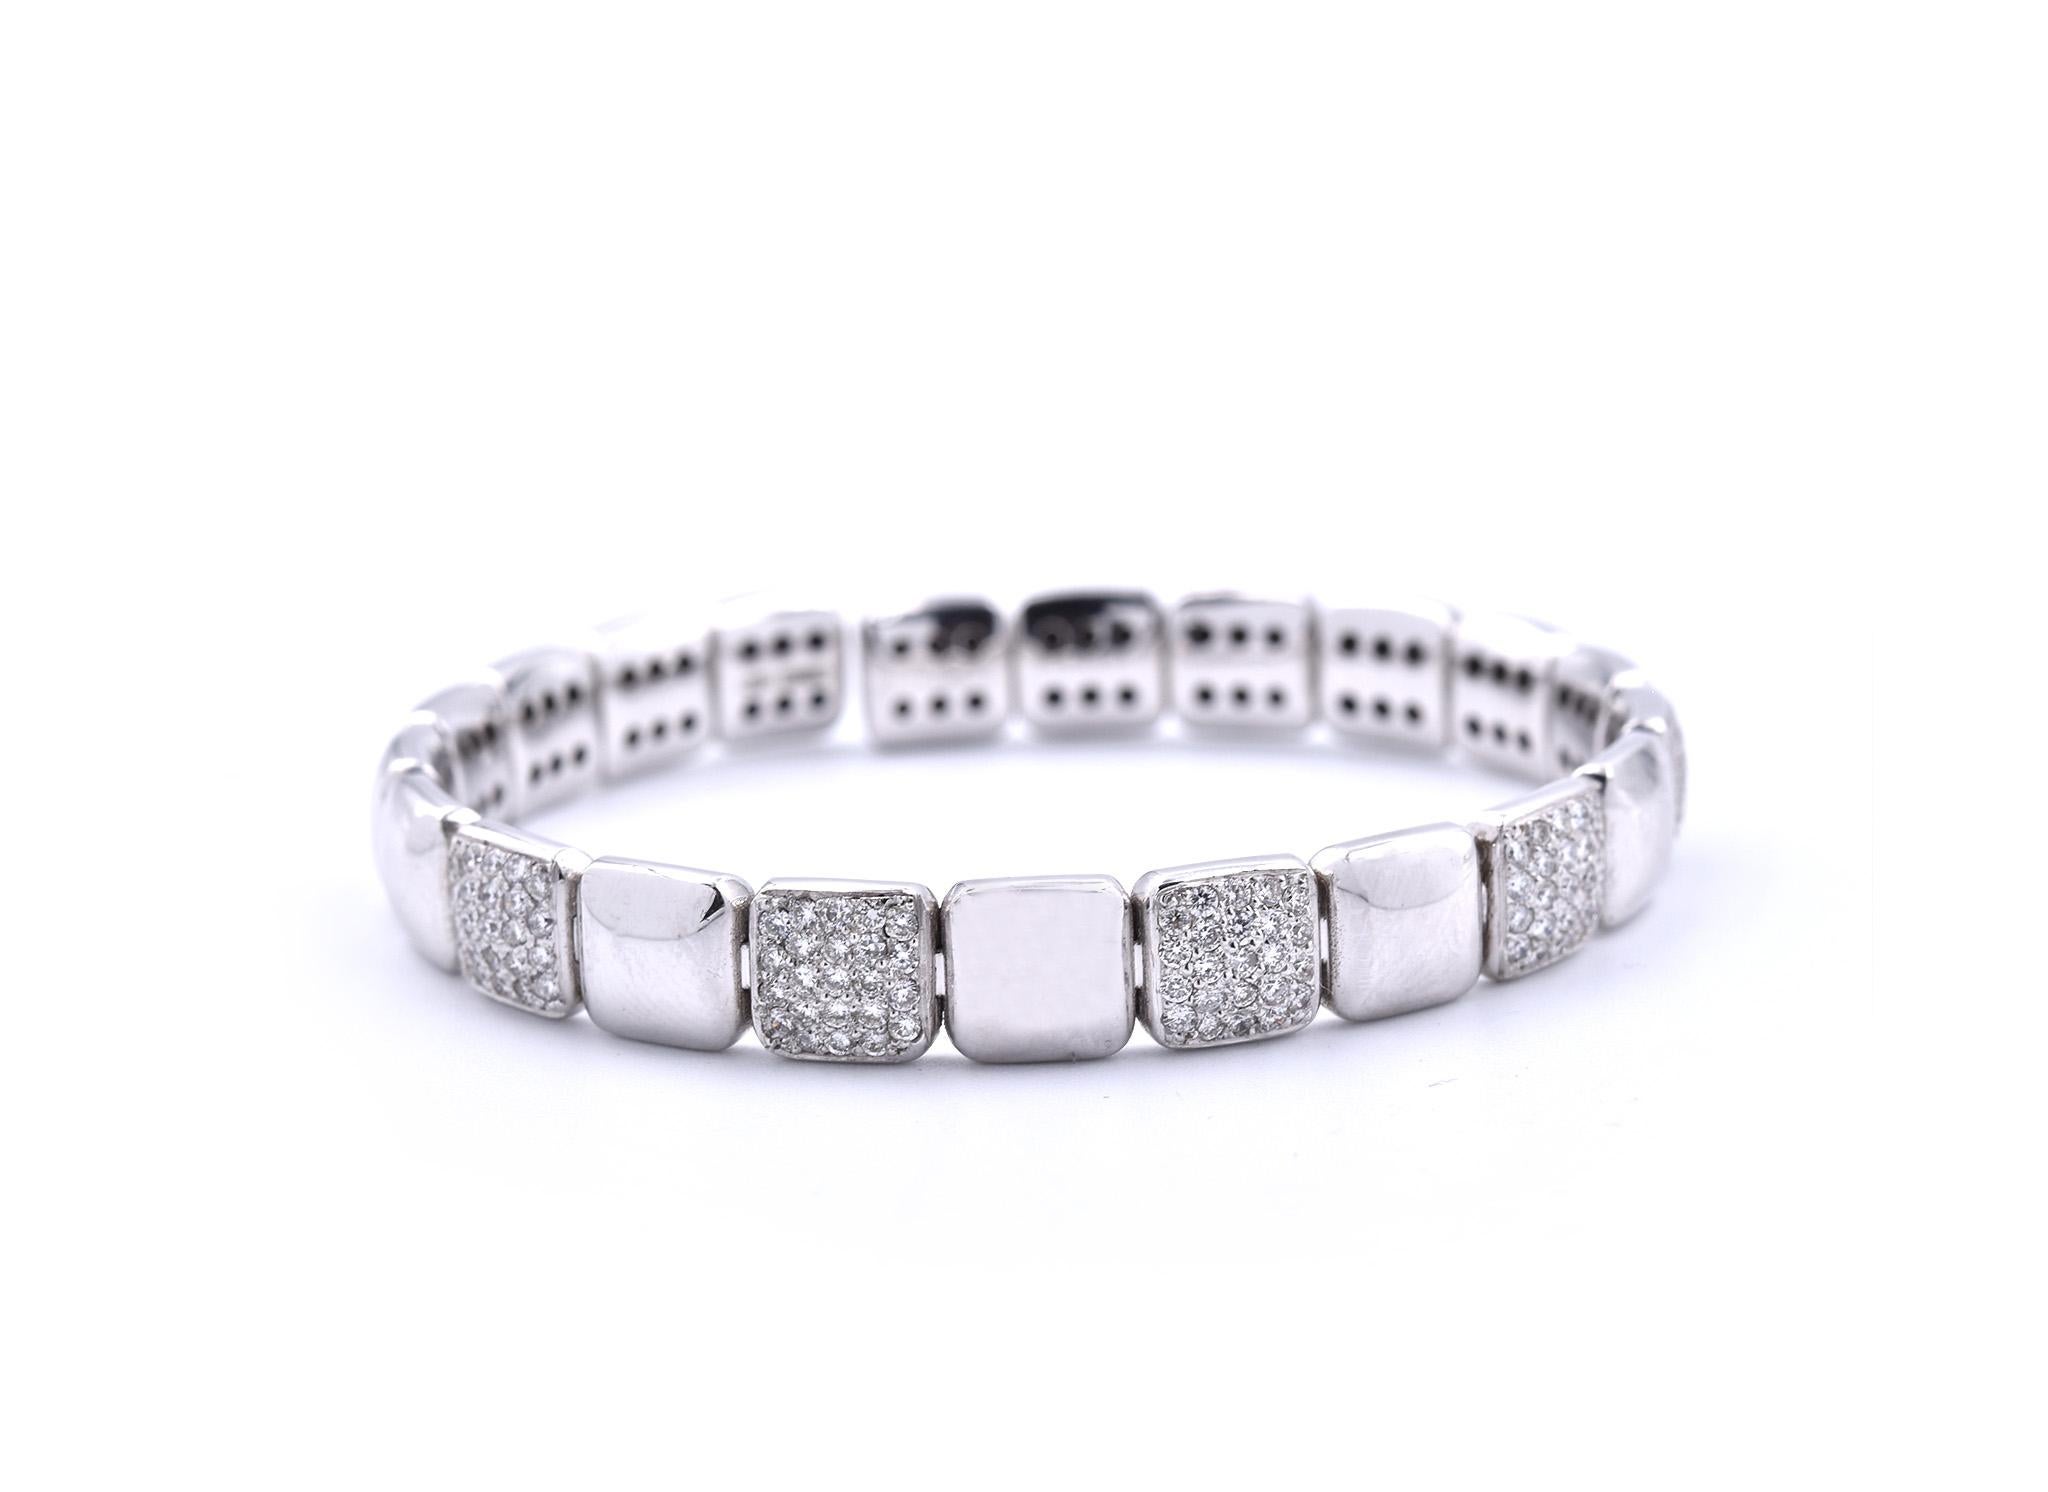 Designer: Watchlink
Material: 18k white gold
Diamonds: round brilliant cuts = 1.25cttw
Dimensions: bracelet will fit up to a 6.5-inch wrist
Weight: 20.48 grams
